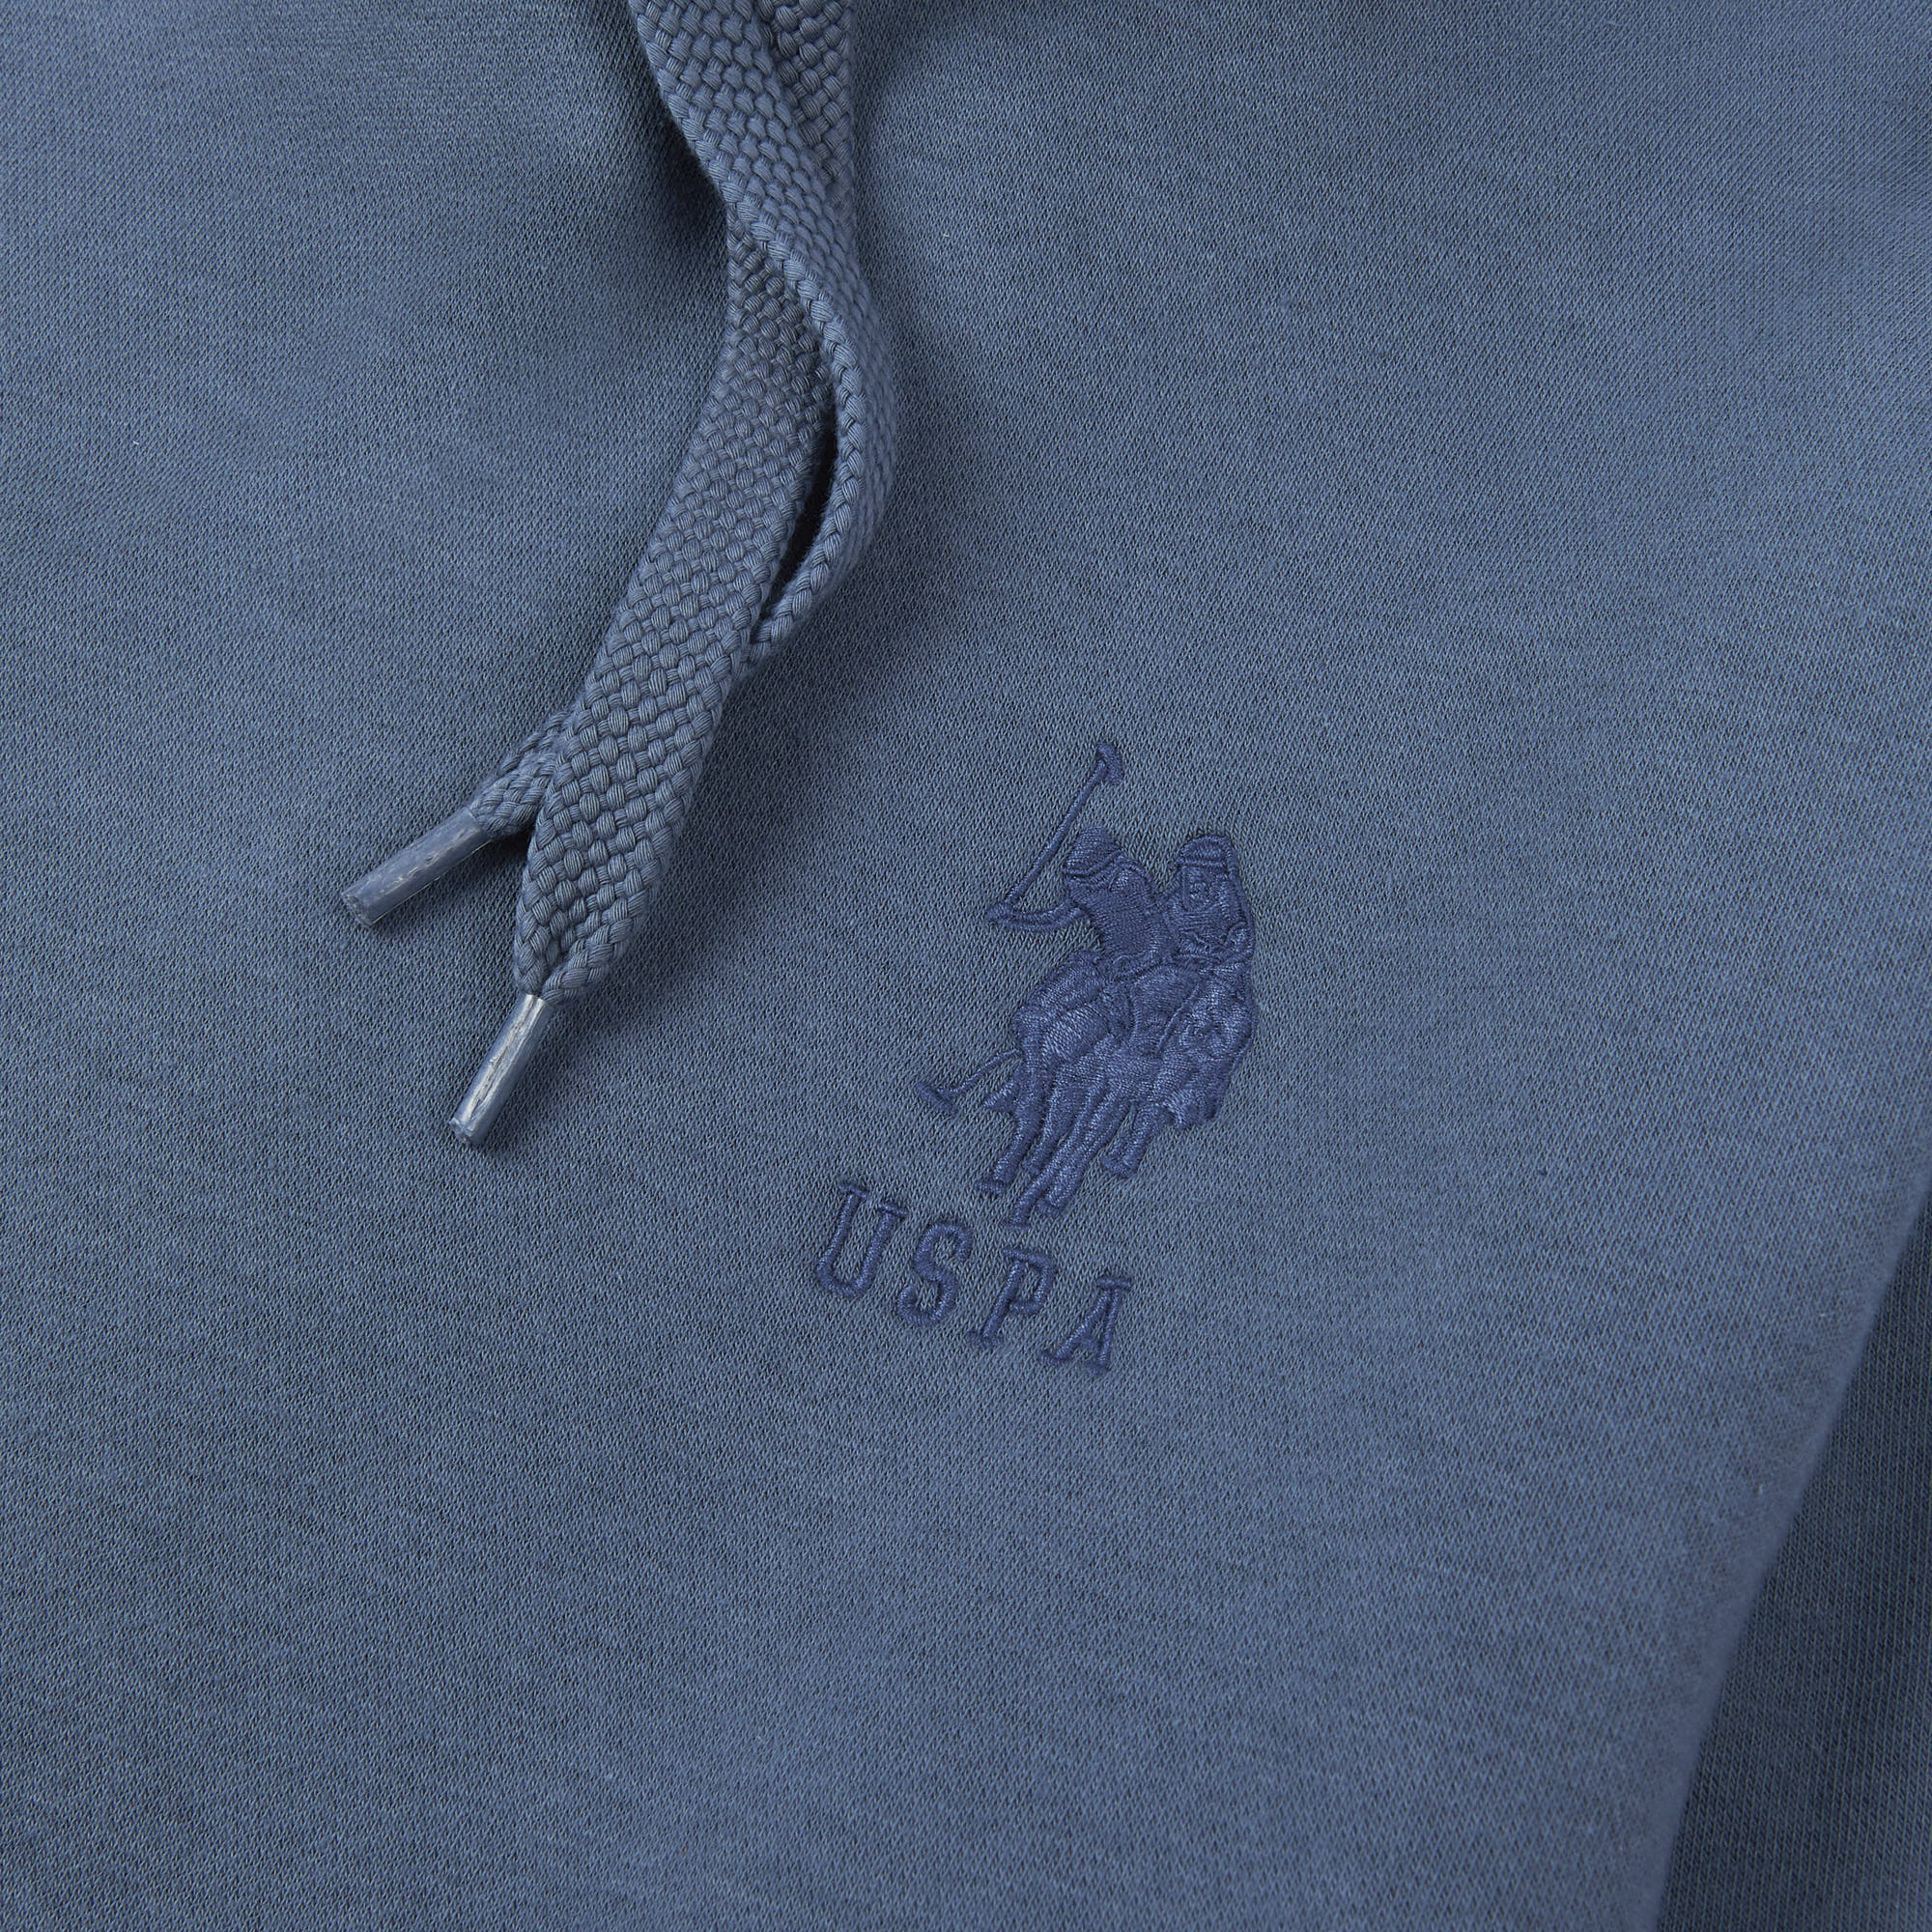 Mens Player 3 Hoodie in China Blue